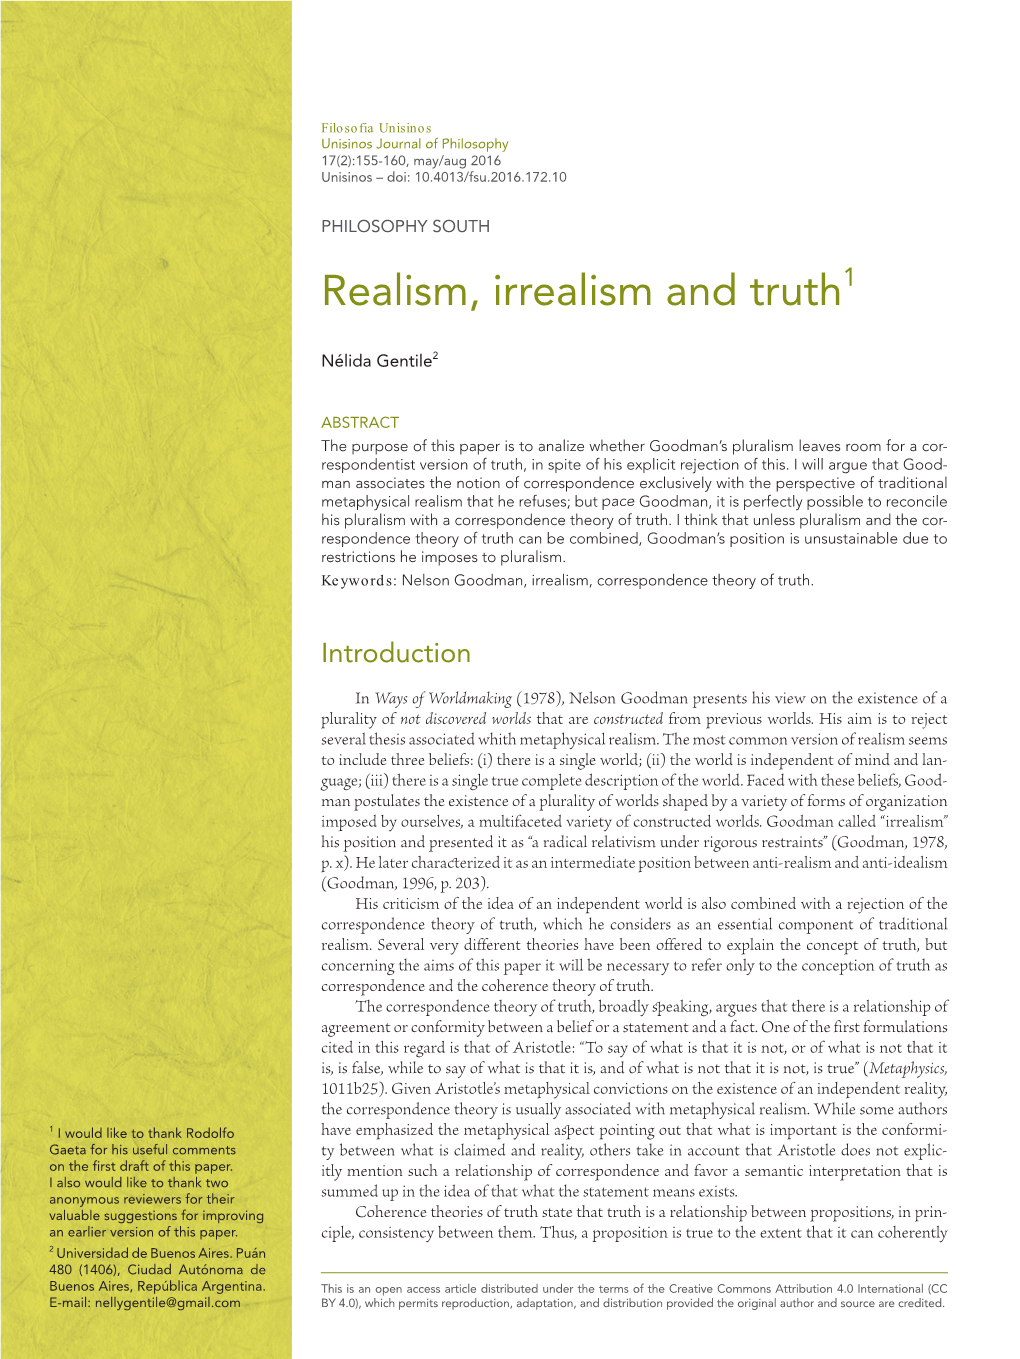 Realism, Irrealism and Truth1